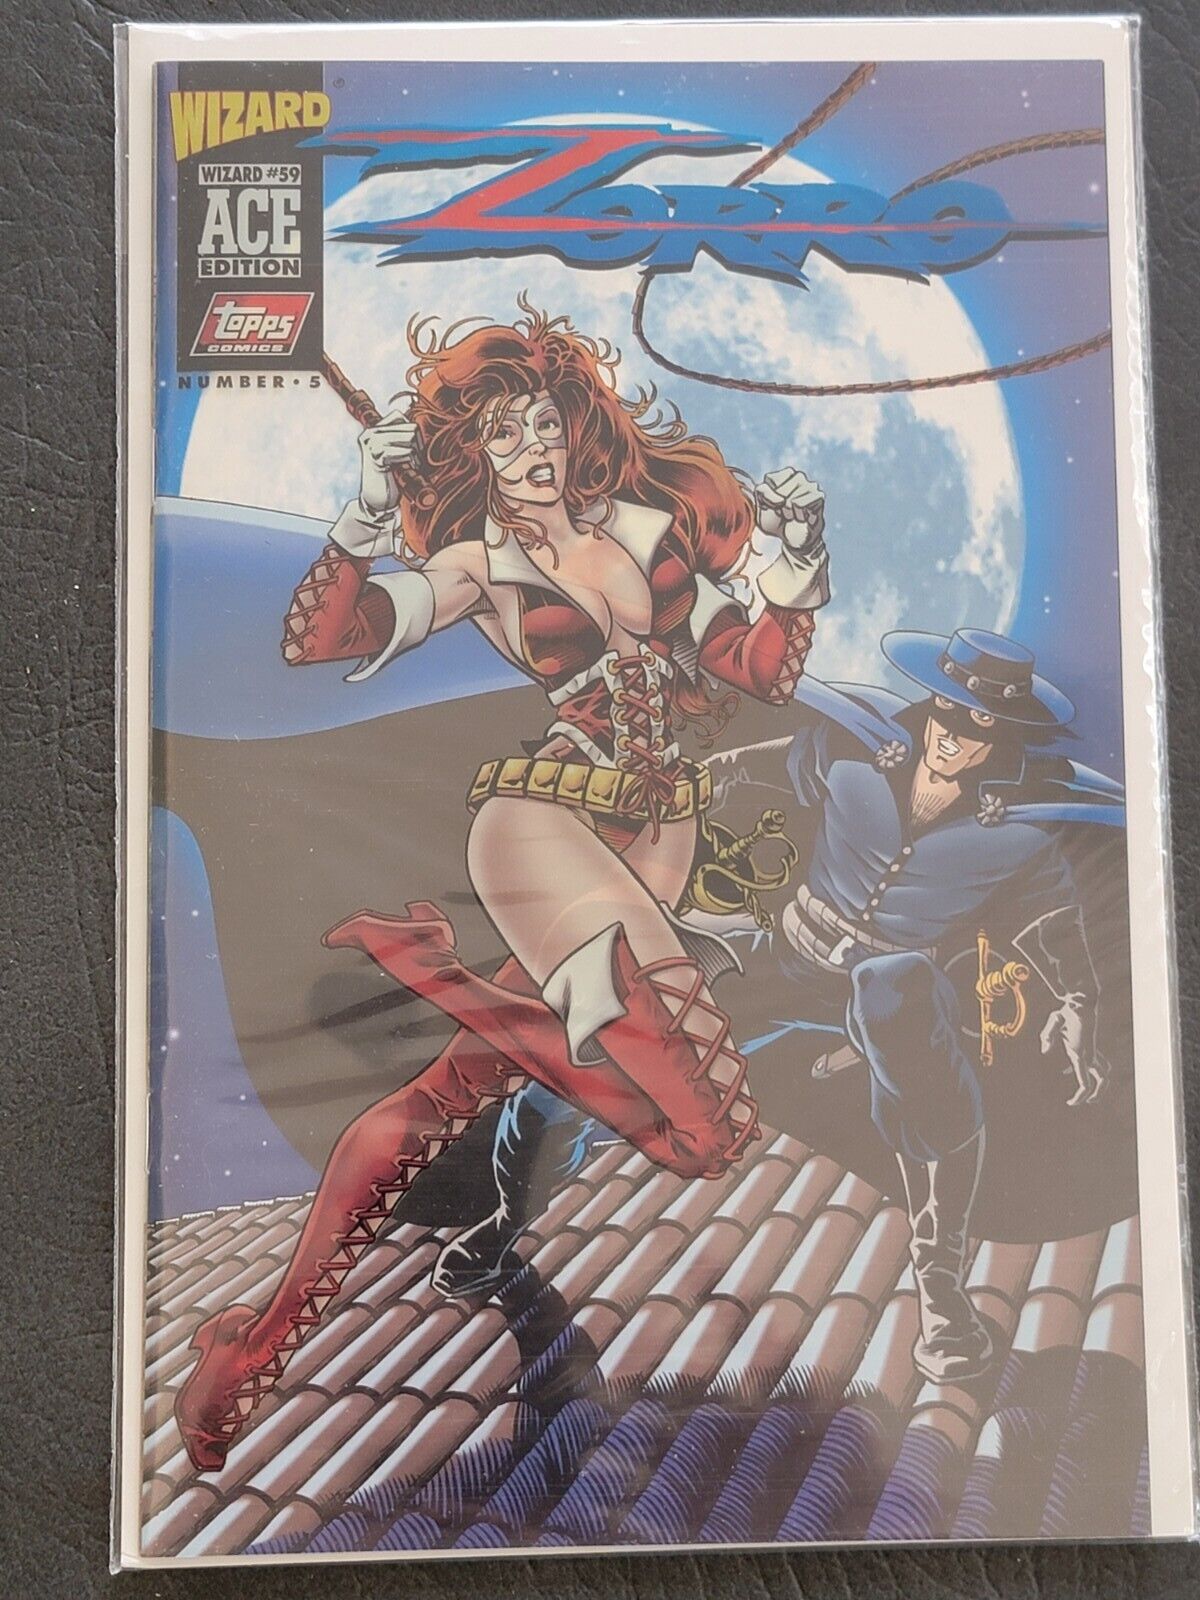 Wizard ACE Edition #59 Topps Comics # 5 Lady Rawhide Acetate Cover 1st